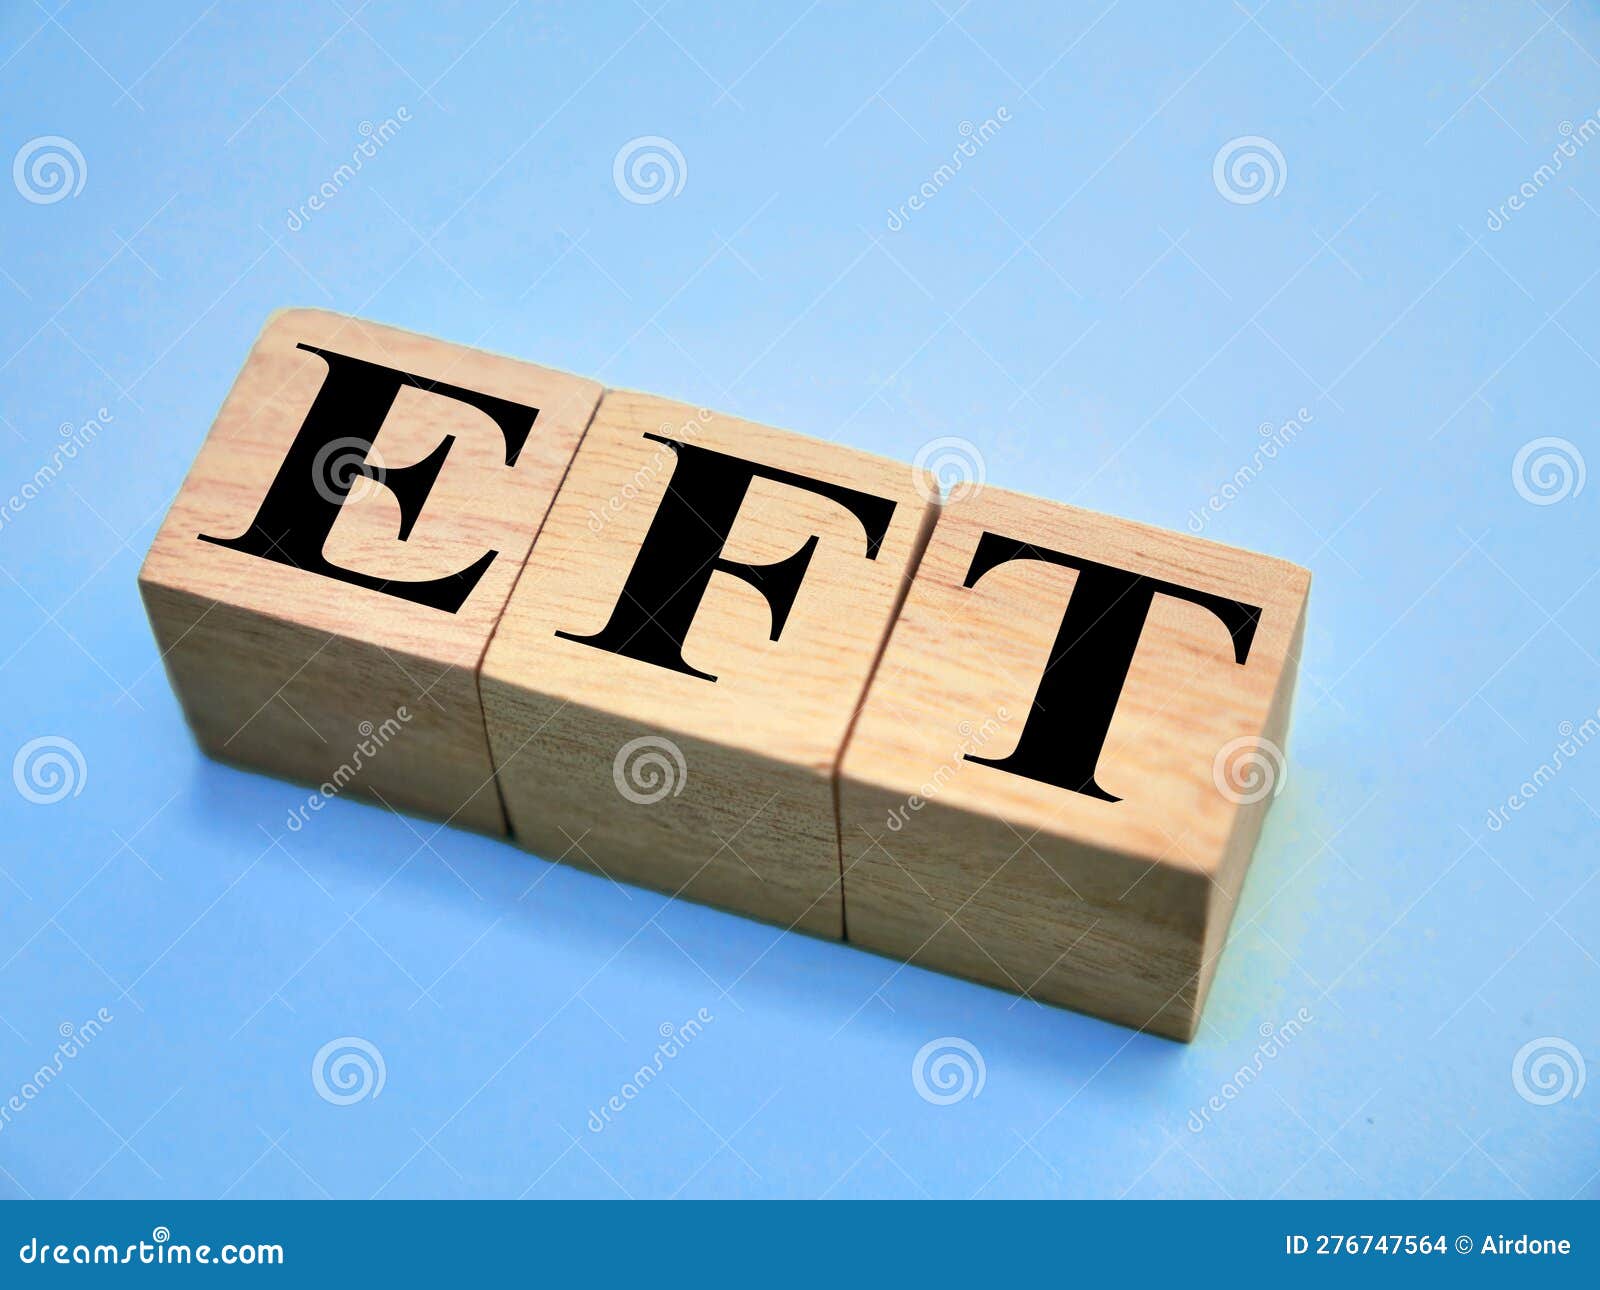 eft, text words typography written with wooden letter, life and business motivational inspirational